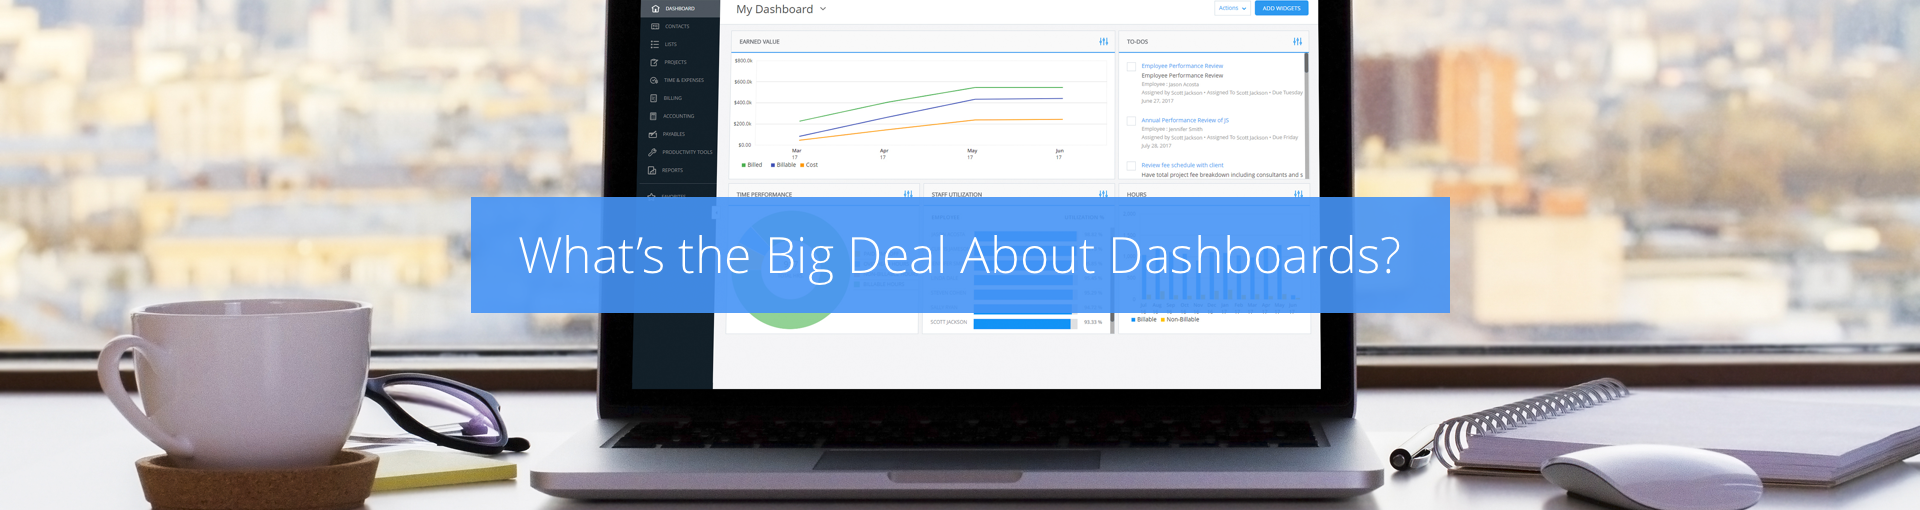 What’s the Big Deal About Dashboards? Featured Image